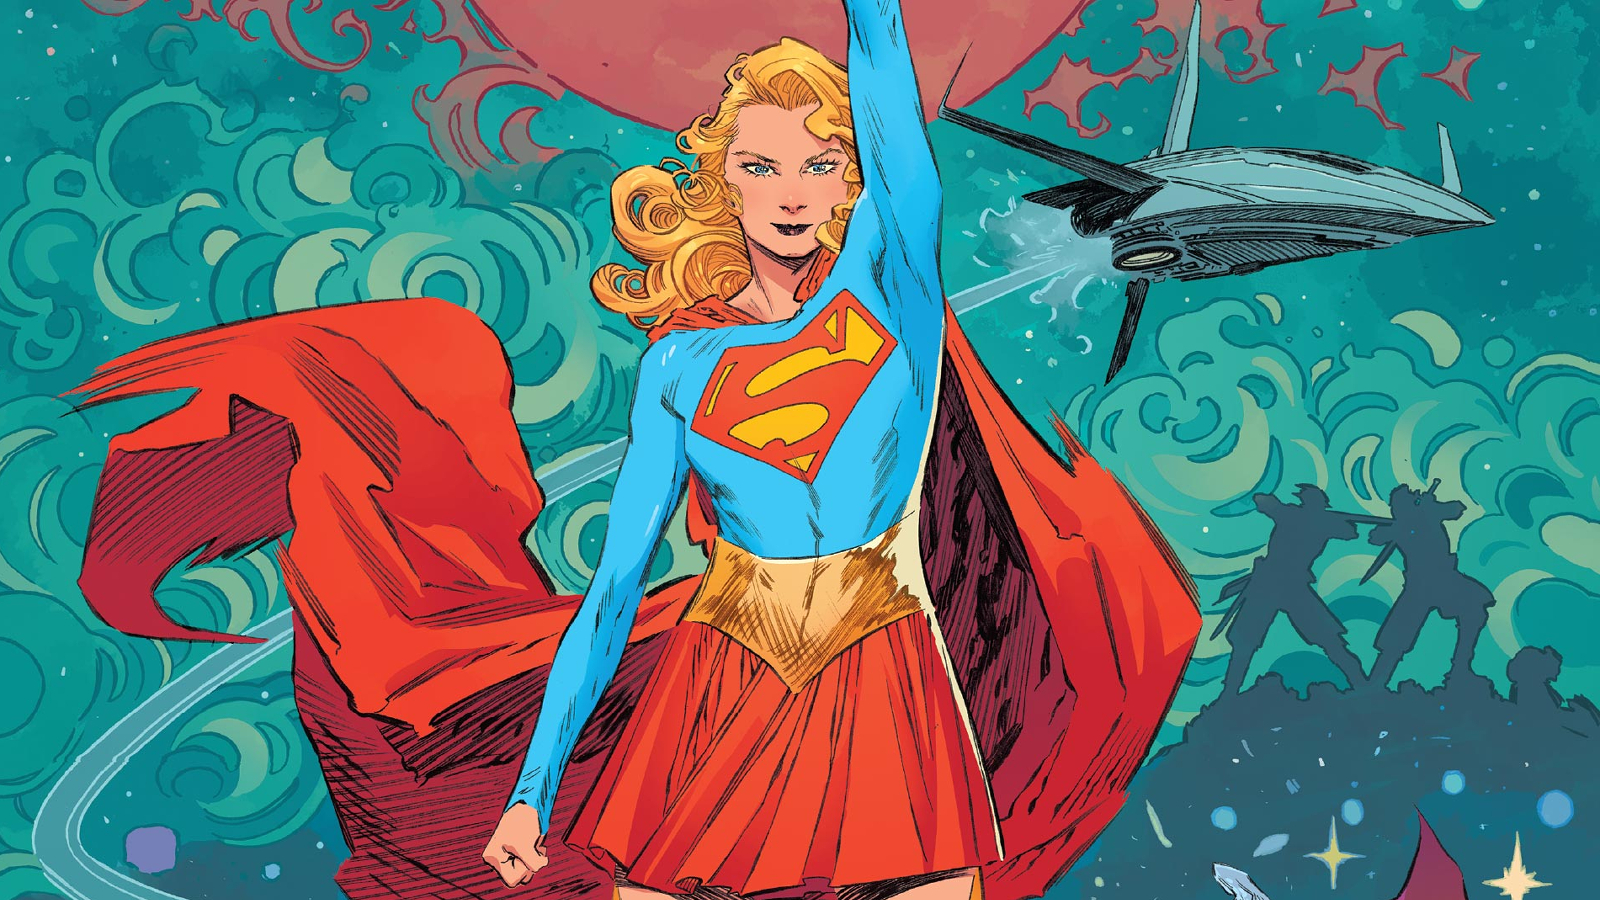 Cropped cover artwork for Supergirl: Woman of Tomorrow #1 by Bilquis Evely